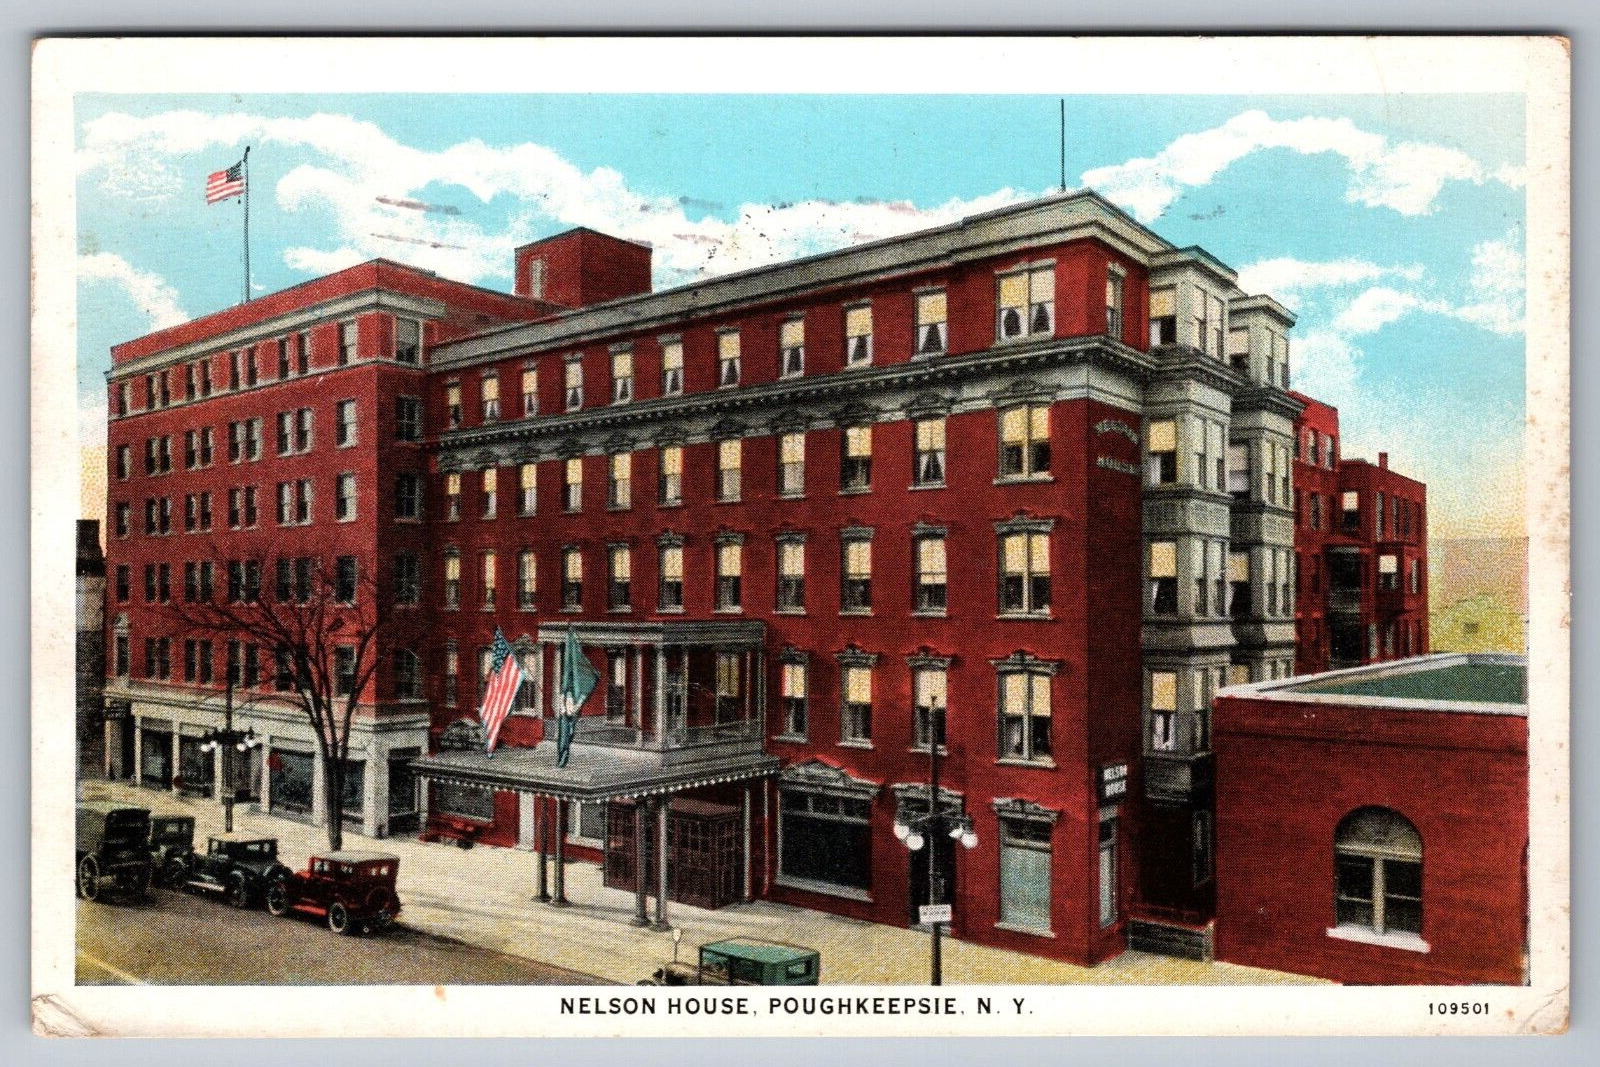 Poughkeepsie NY Postcard c1925 Nelson House Hotel Old Cars on Street